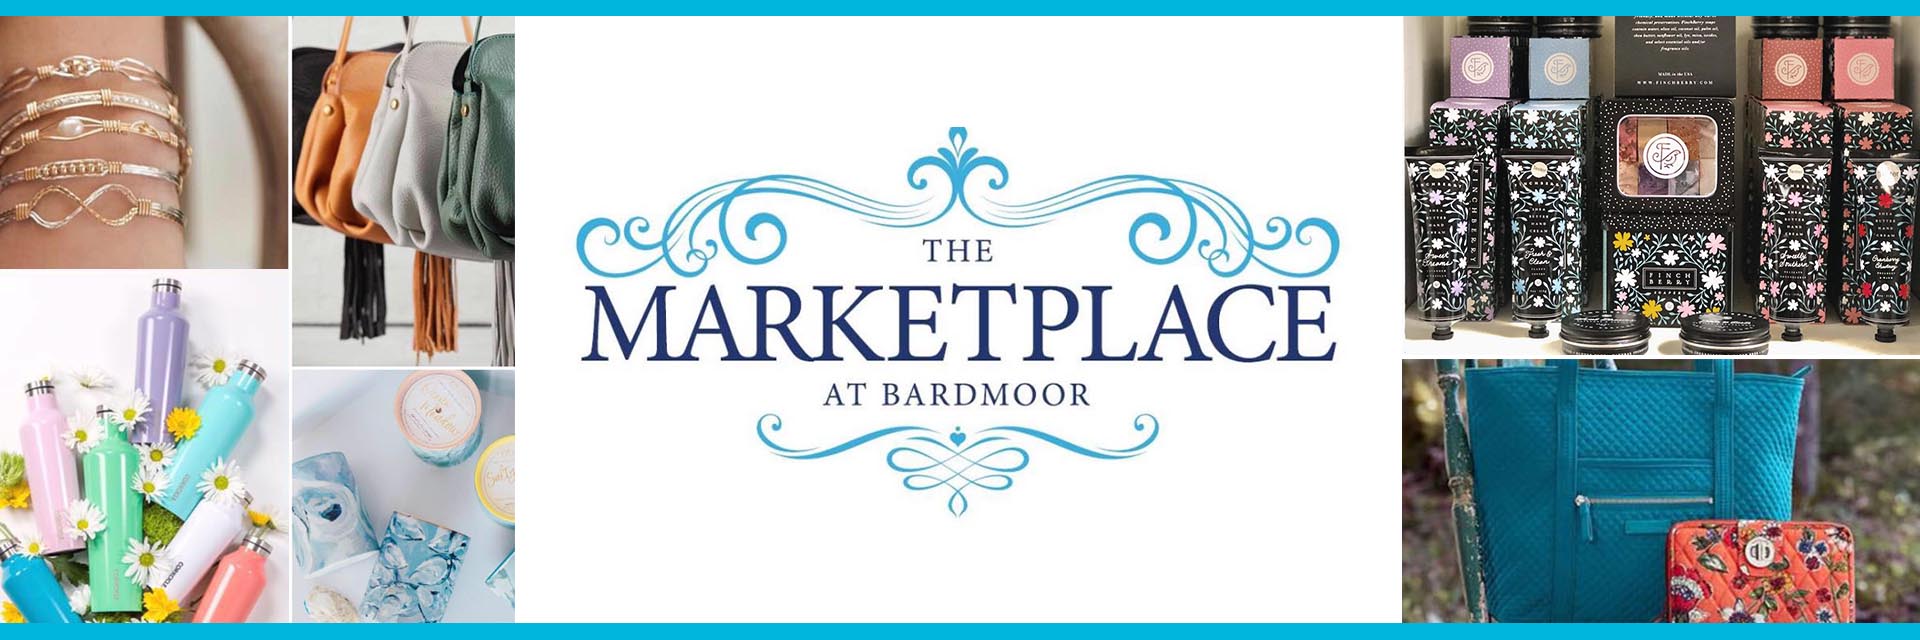 The Marketplace at Bardmoor logo and photos of various gift items